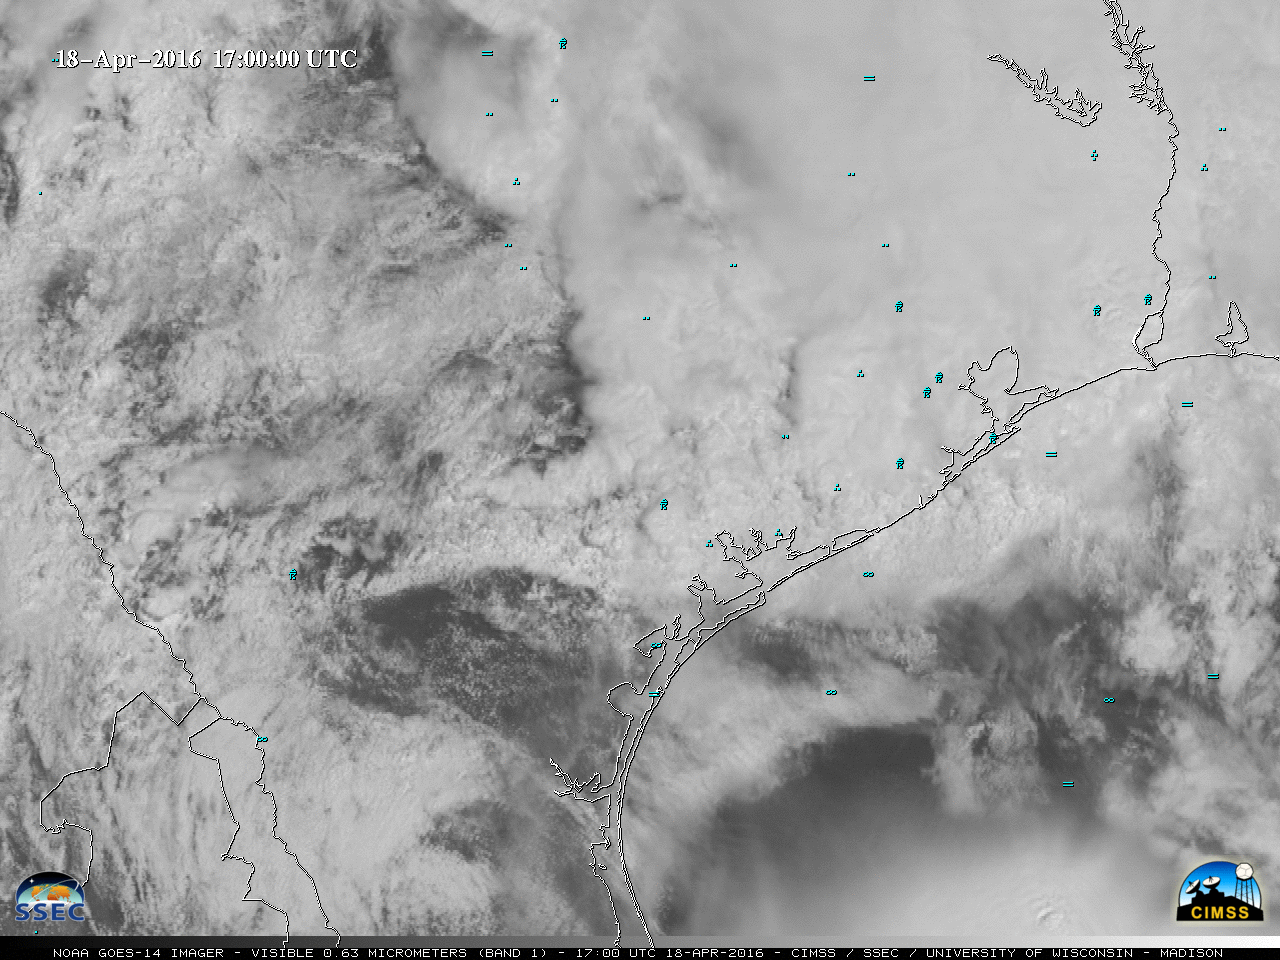 GOES-14 Visible (0.63 µm) images, with plots of surface weather symbols [click to play MP4 animation]